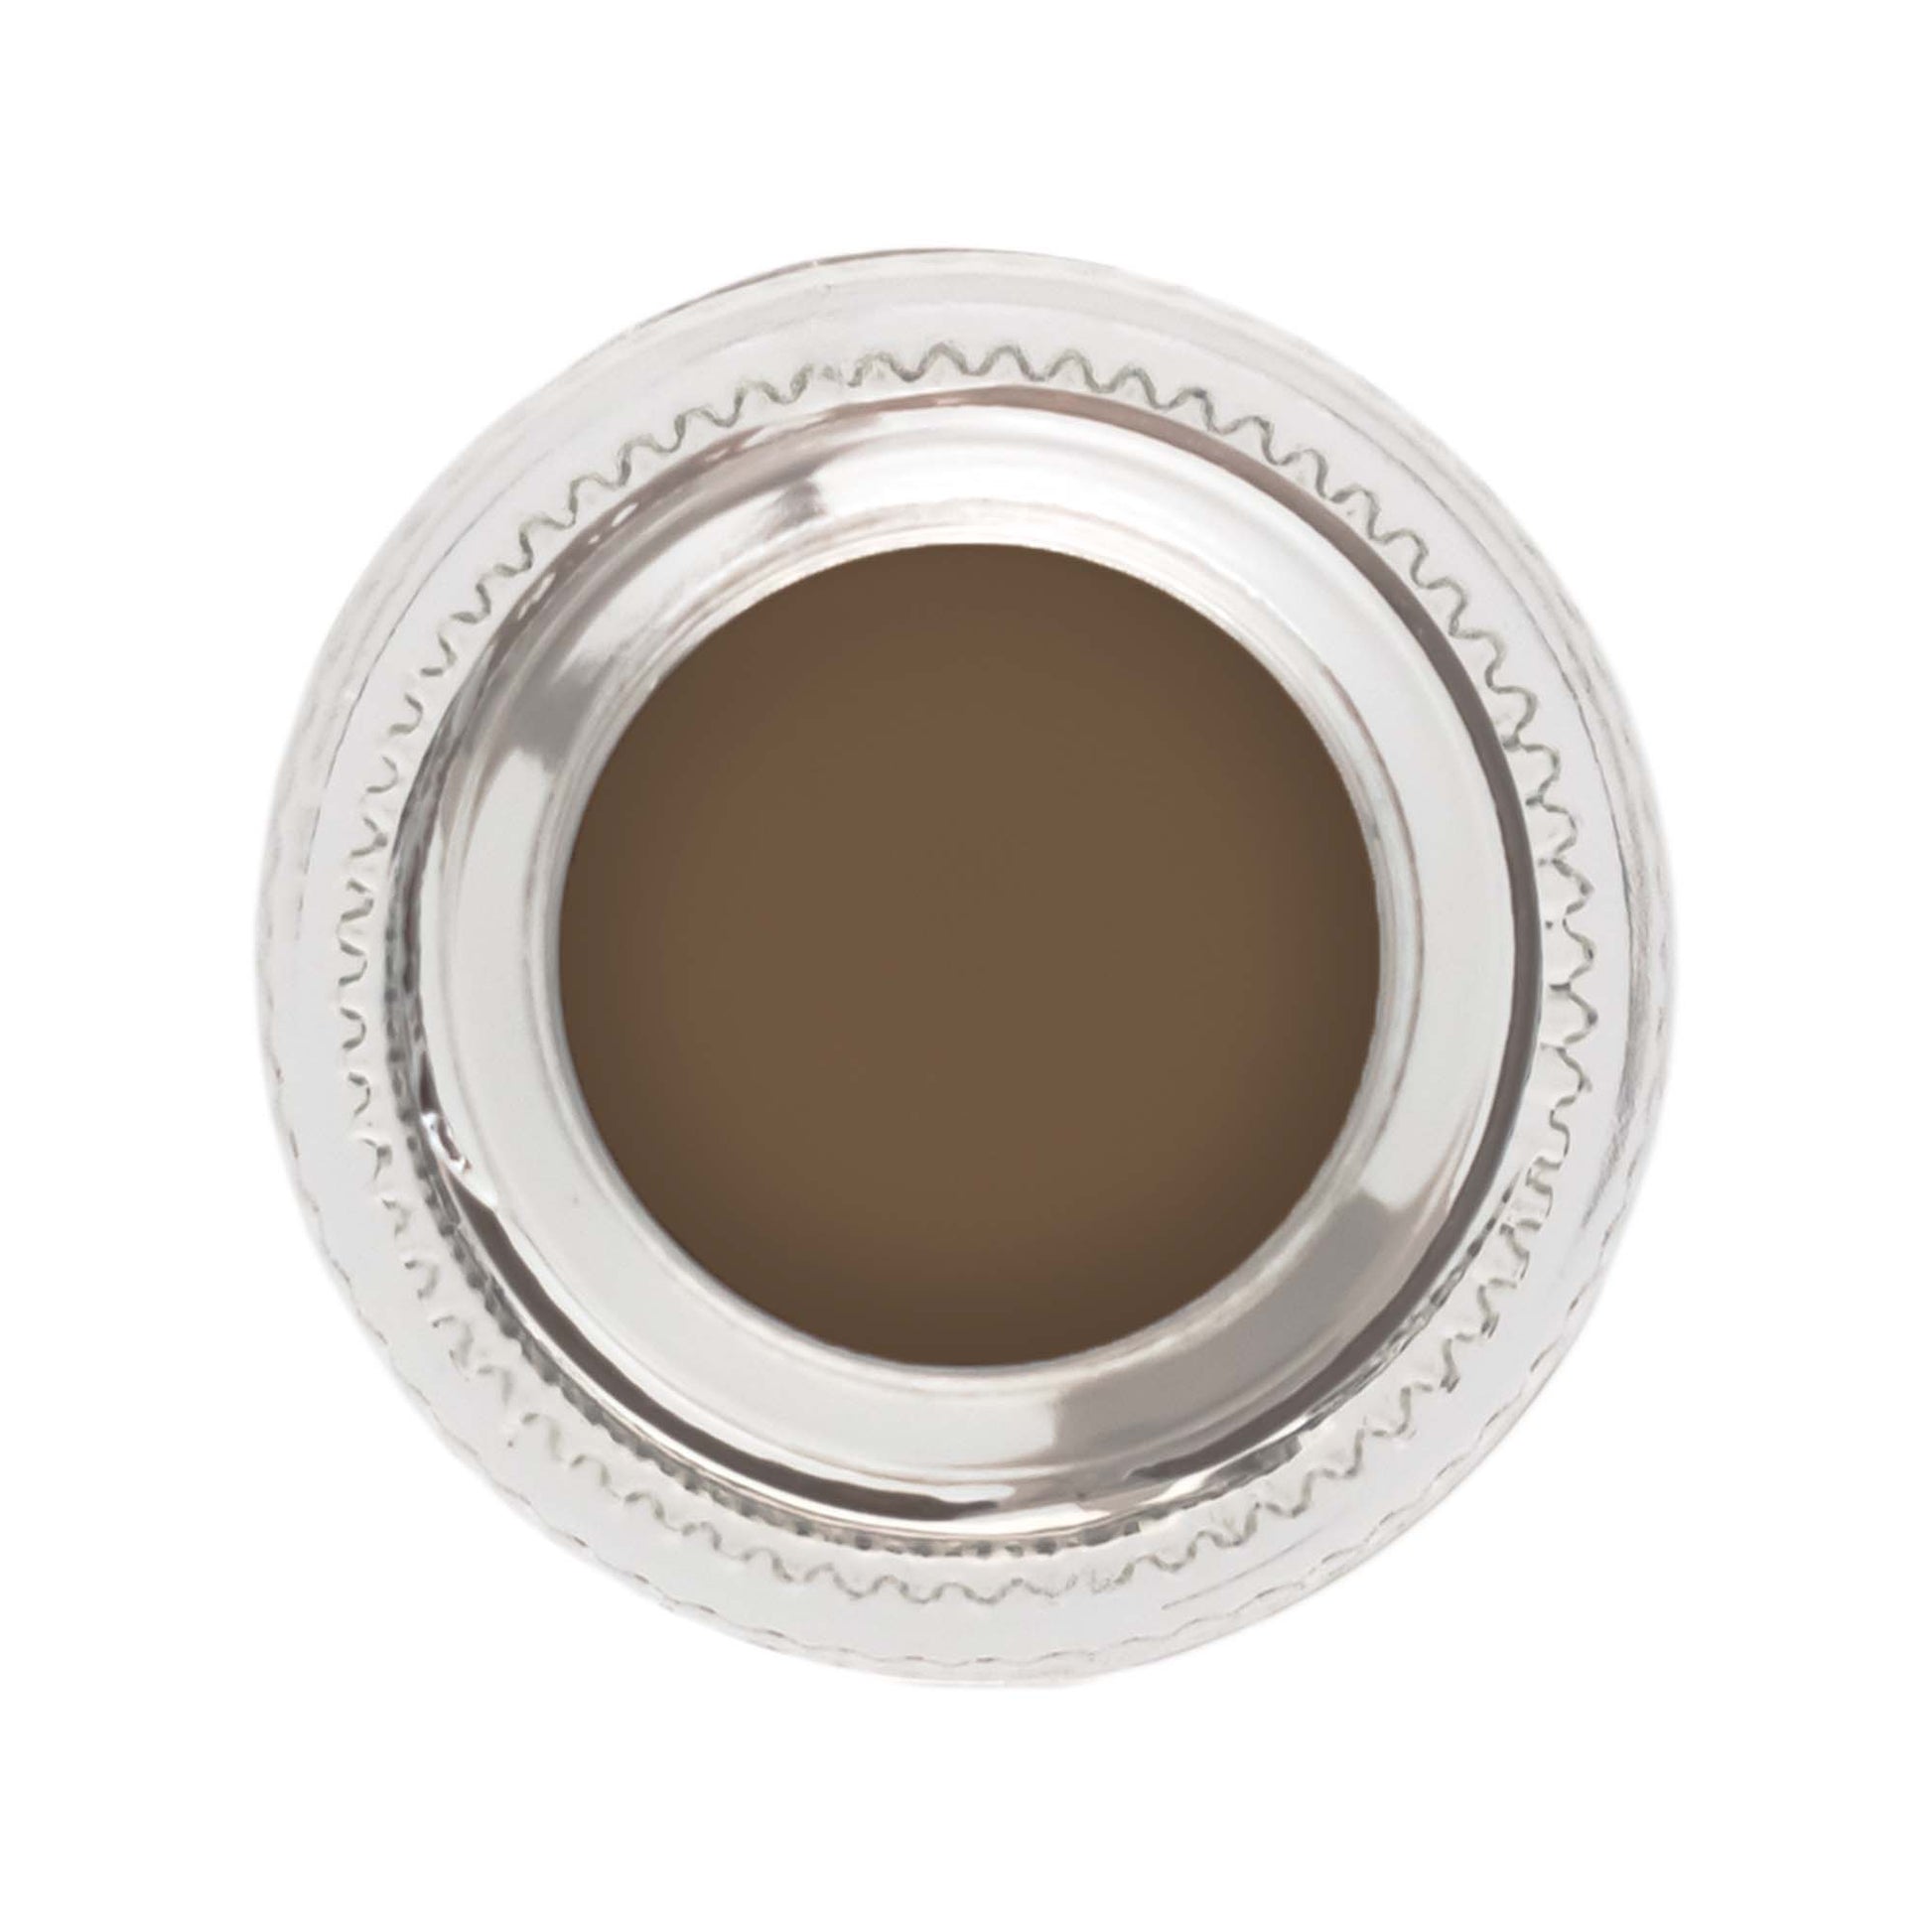 Intensify your brow glee with Cruisin Organics Choco-Latte Brow Pomade. Formulated with natural ingredients, this pomade delivers precise, long-lasting color and definition. Say goodbye to smudging and hello to shaped and natural-looking brows. Get vegan and cruelty-free brow treatment with Choco-Latte Brow Pomade.